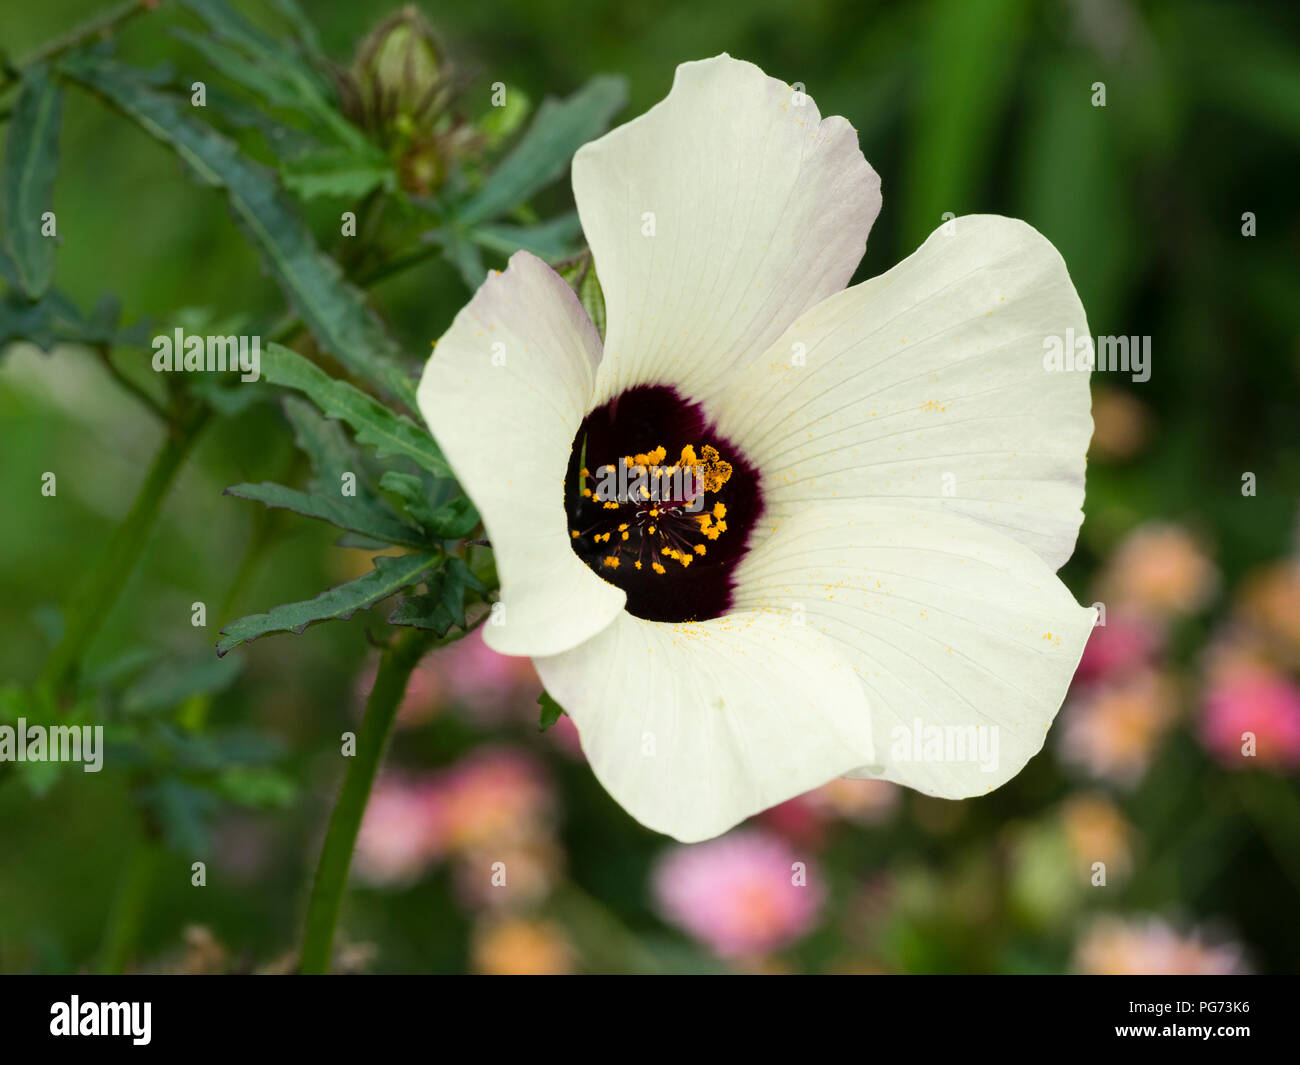 Dark eyed white bloom of the flower of the hour, Hibiscus trionum, a tender perennial grown as a summer flowering annual Stock Photo